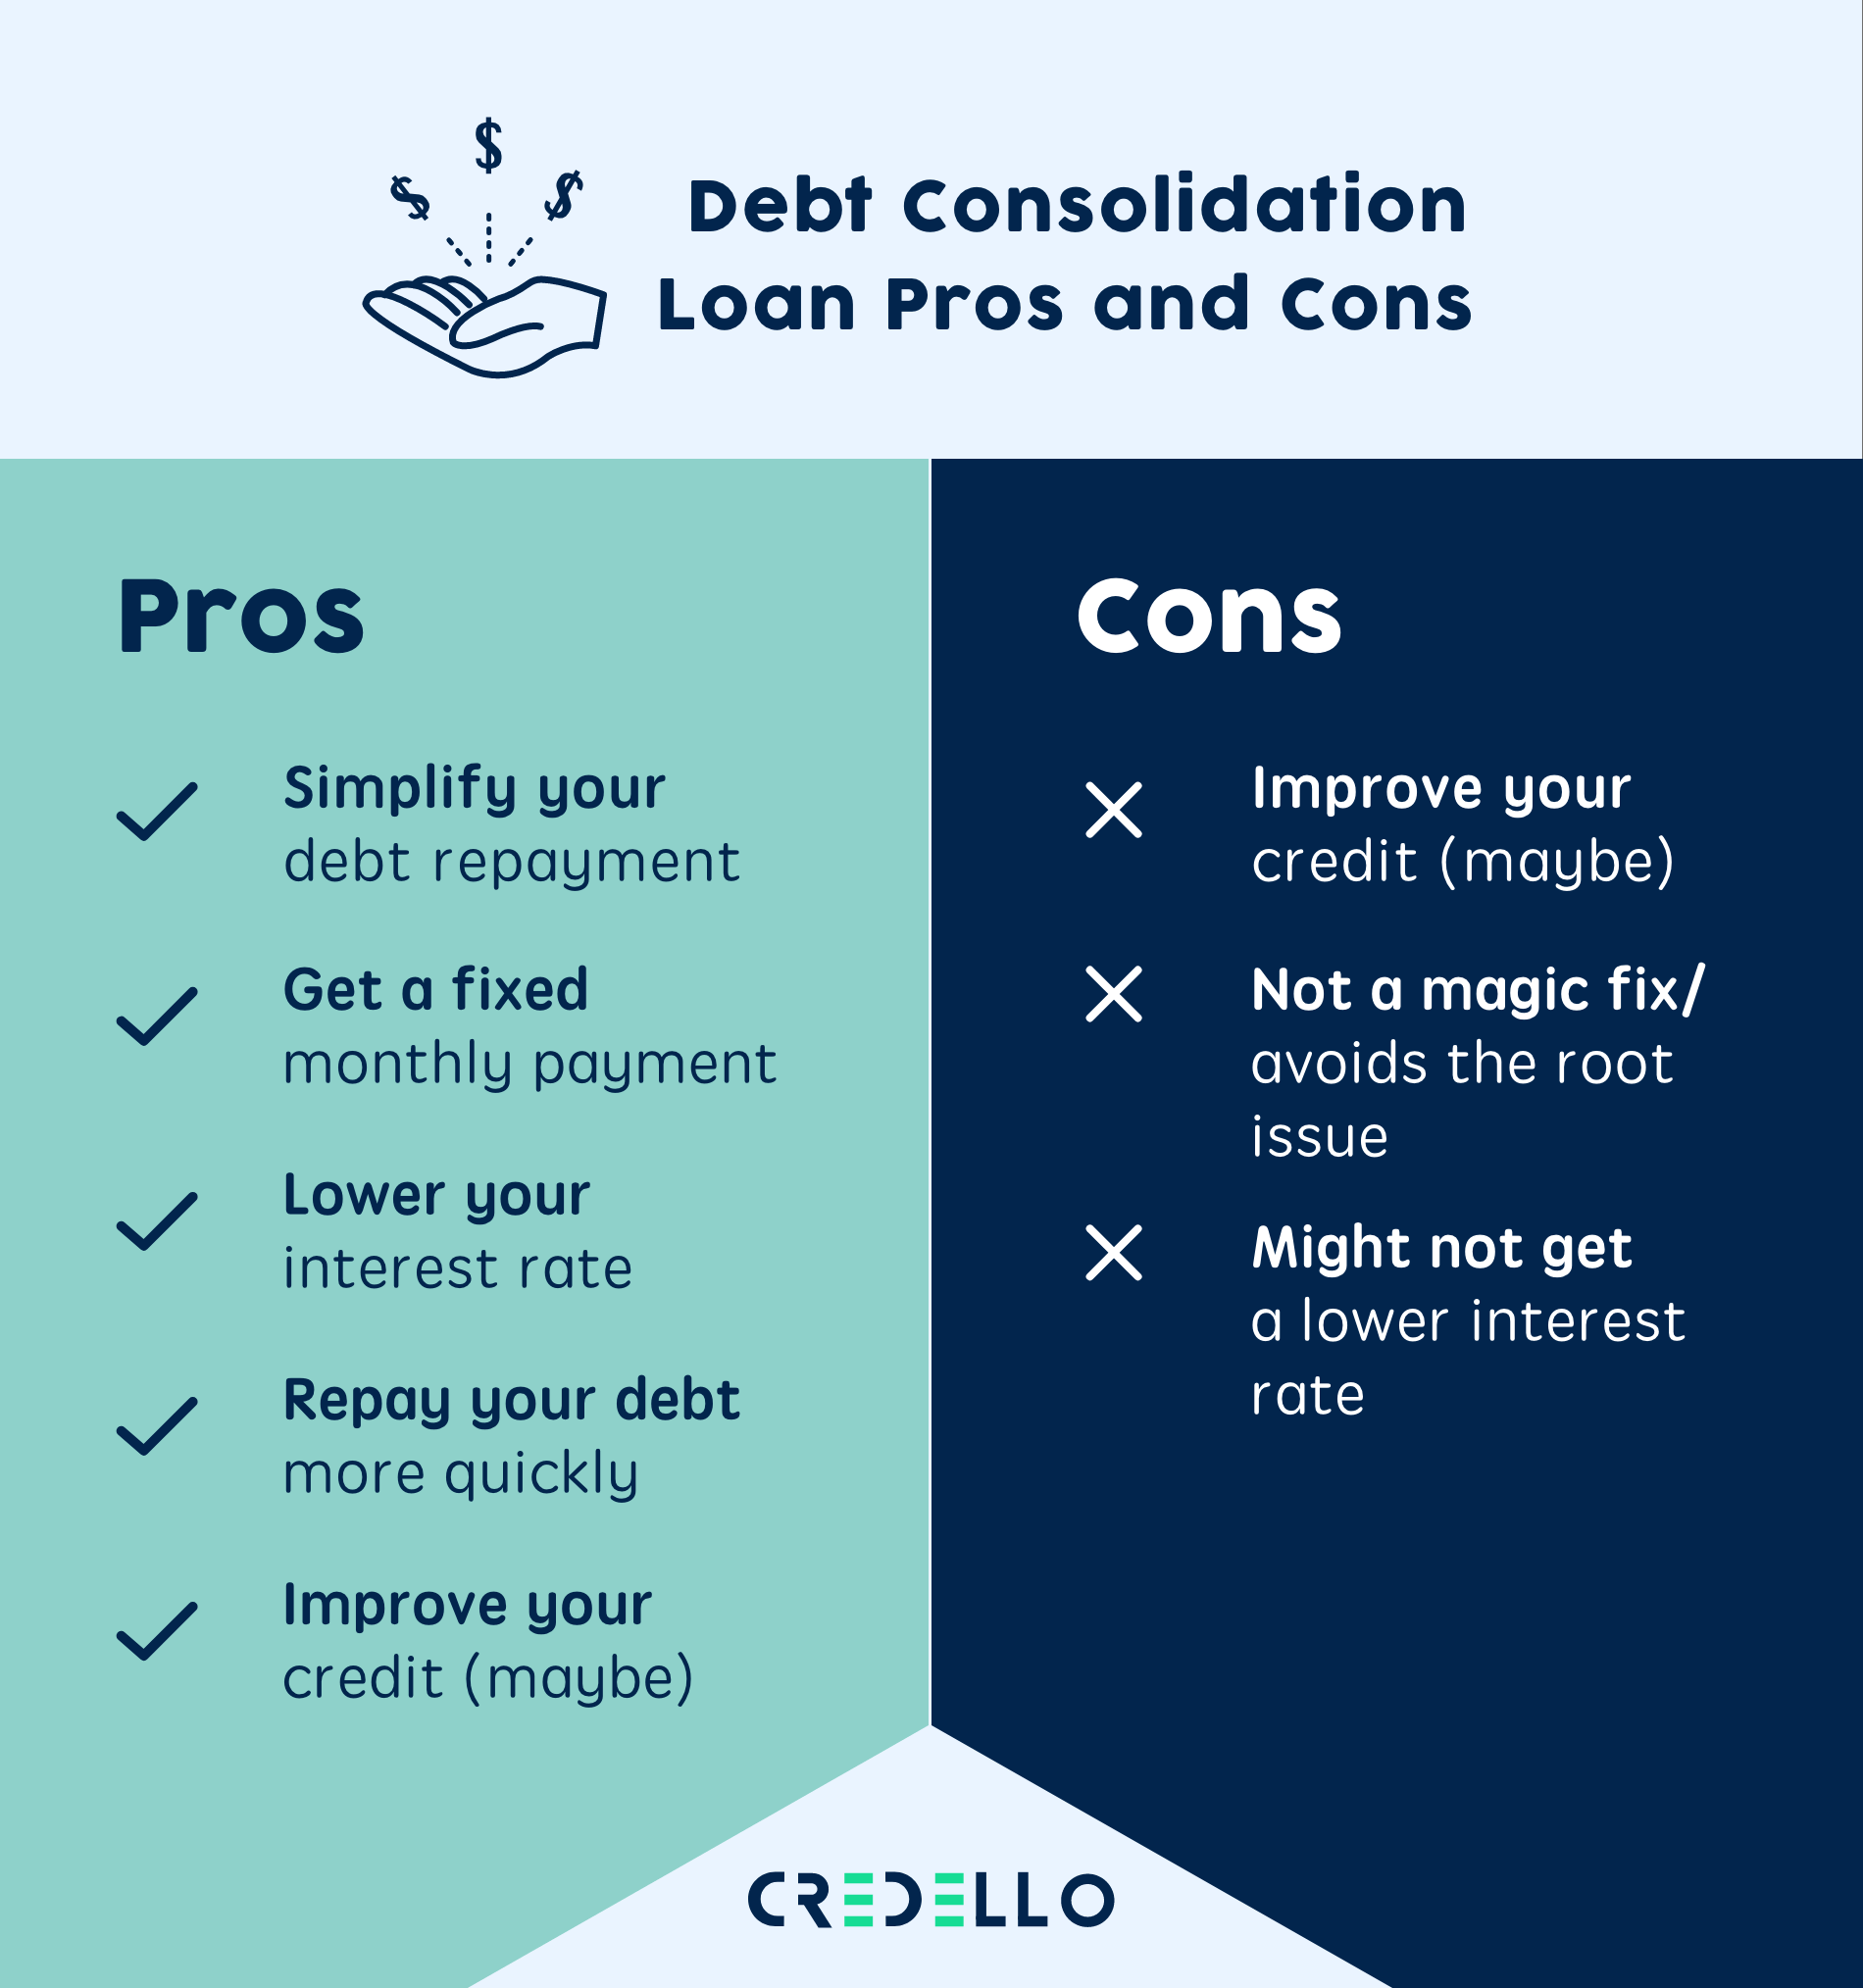 Debt Consolidation: Here are the Pros and Cons